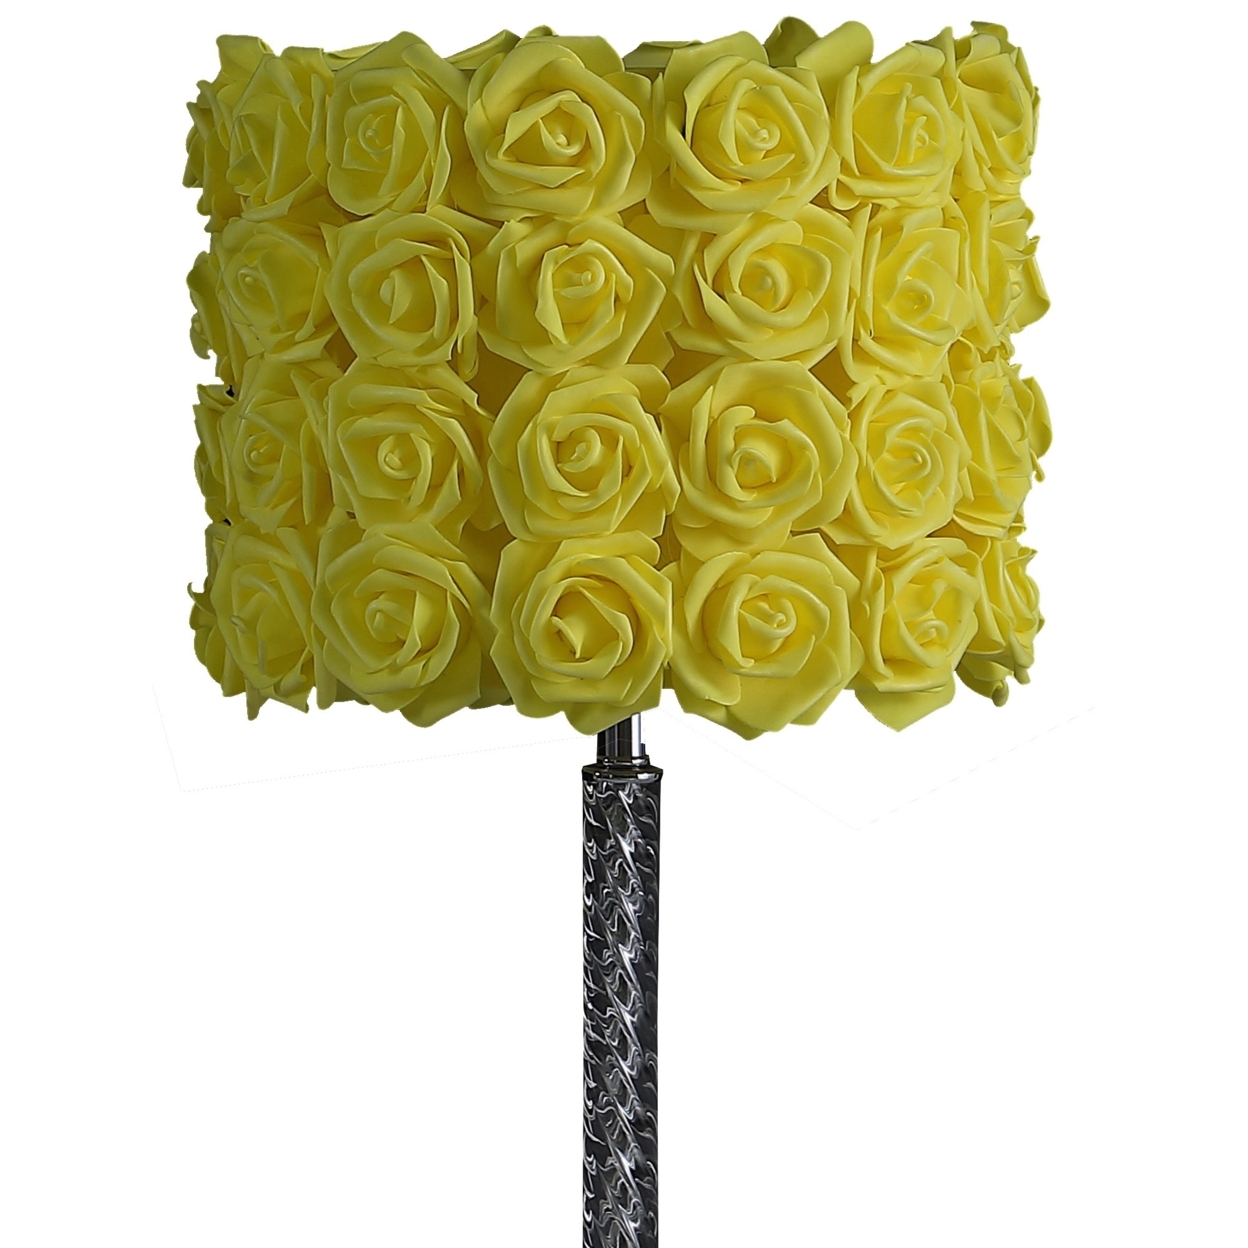 Bloom Roses Drum Shade Table Lamp With Twisted Acrylic Base, Yellow- Saltoro Sherpi